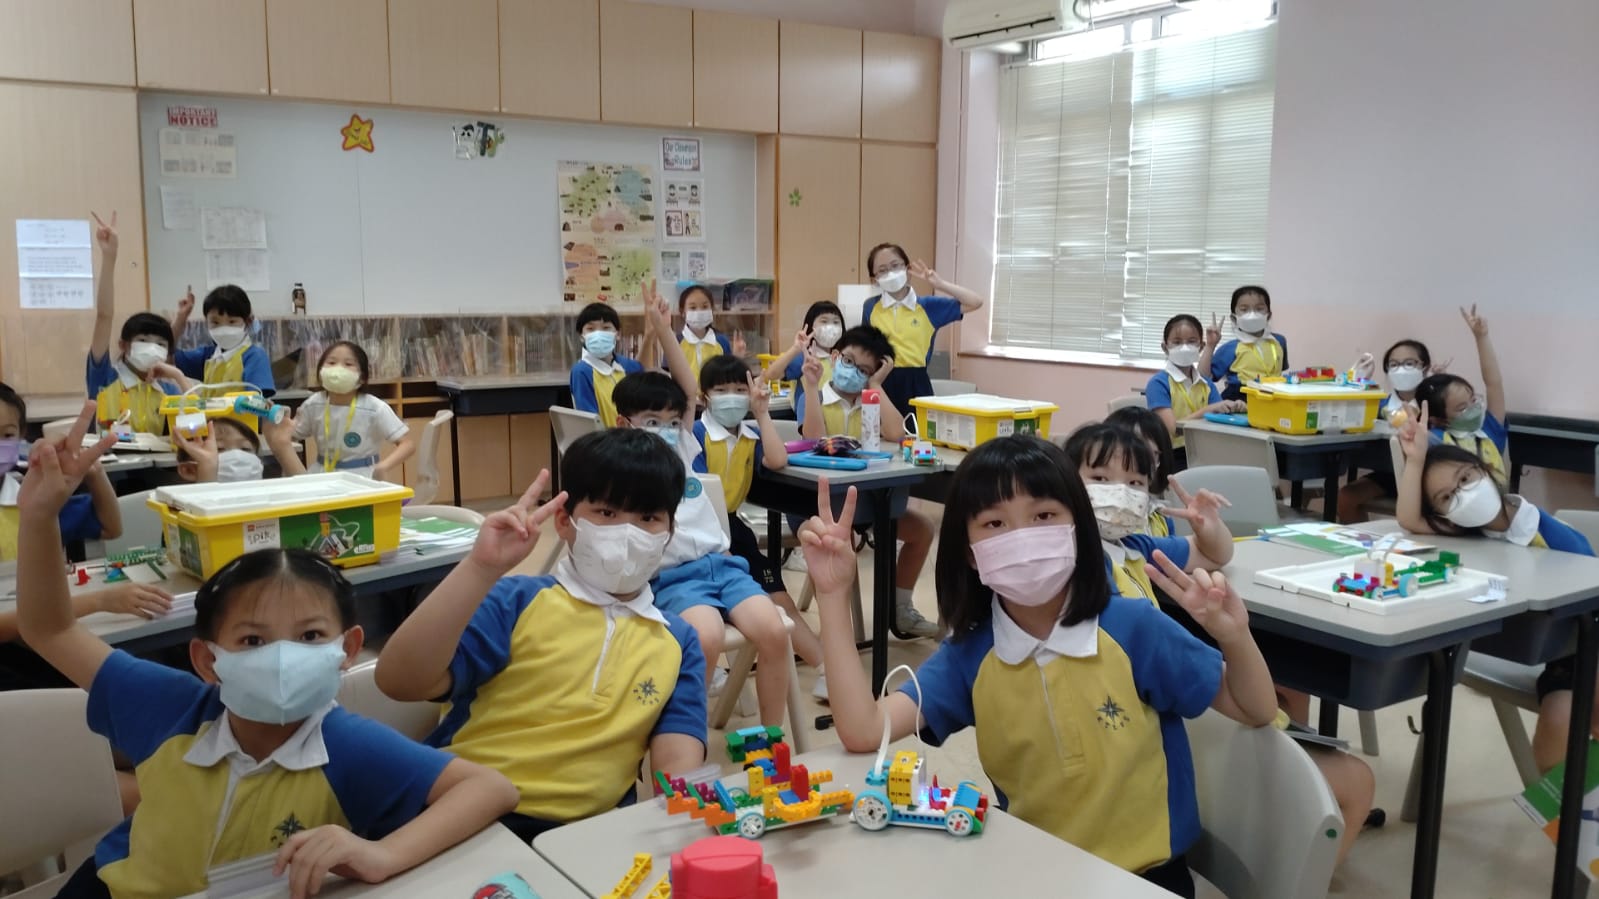 SPIKE Essential Fun Day - Kowloon True Light School (Primary Section)